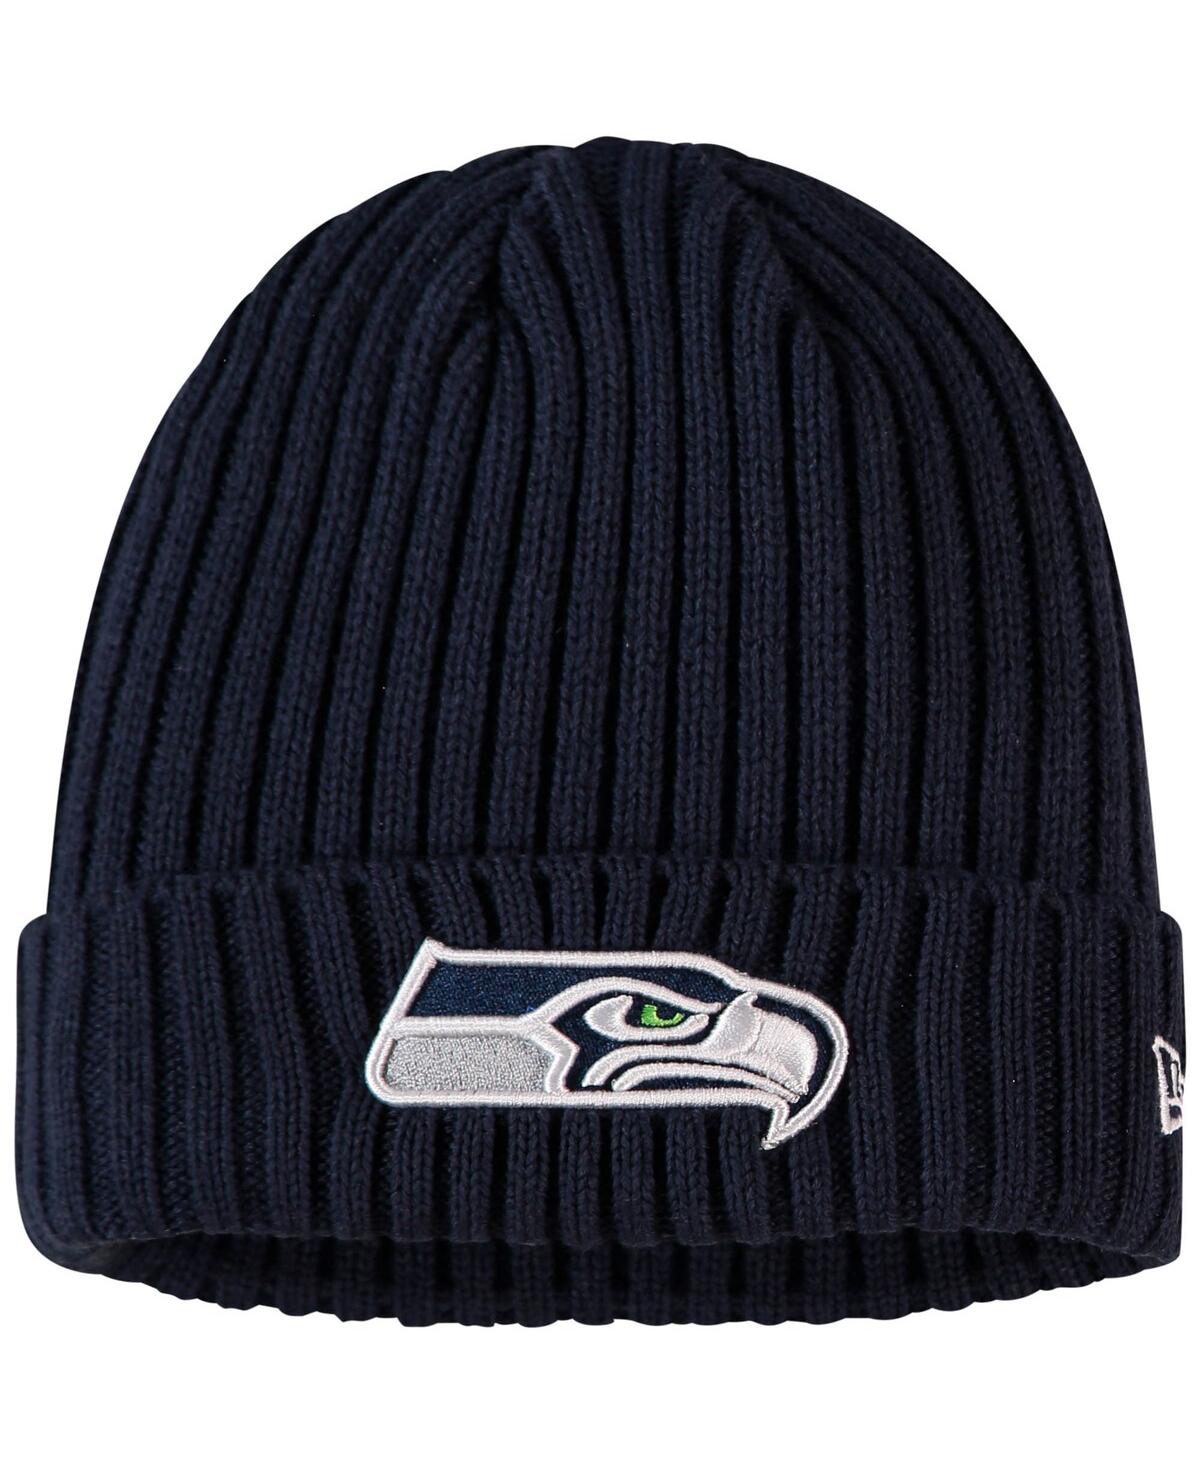 New Era Babies' Little Boys And Girls College Navy Seattle Seahawks Logo Core Classic Cuffed Knit Hat